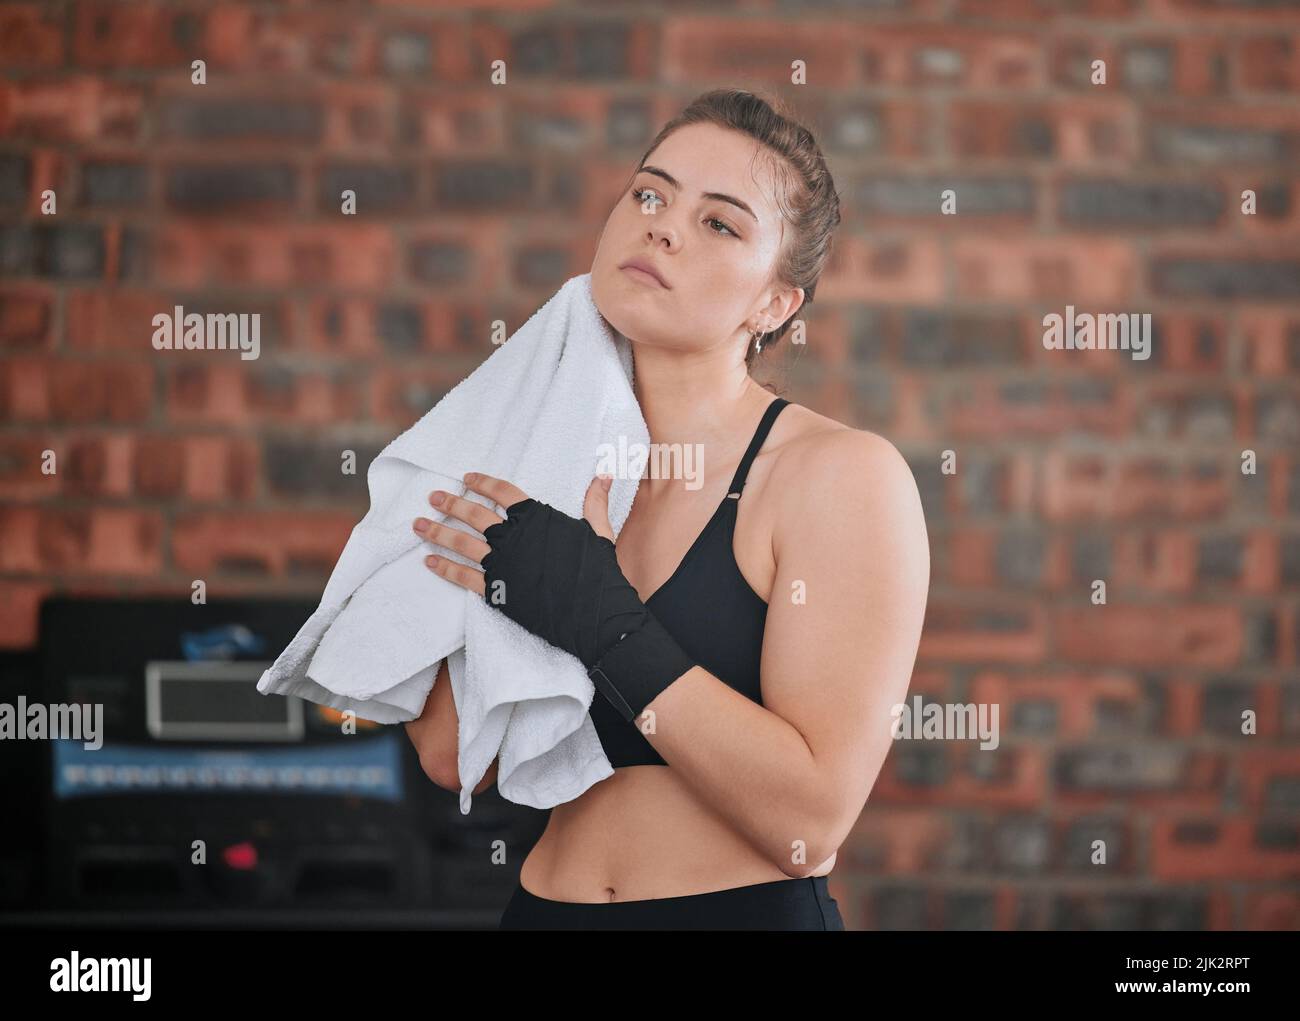 Healthy, fit and active female boxer wiping sweat with a towel after a workout in the gym or health club. Young woman completing and finishing Stock Photo